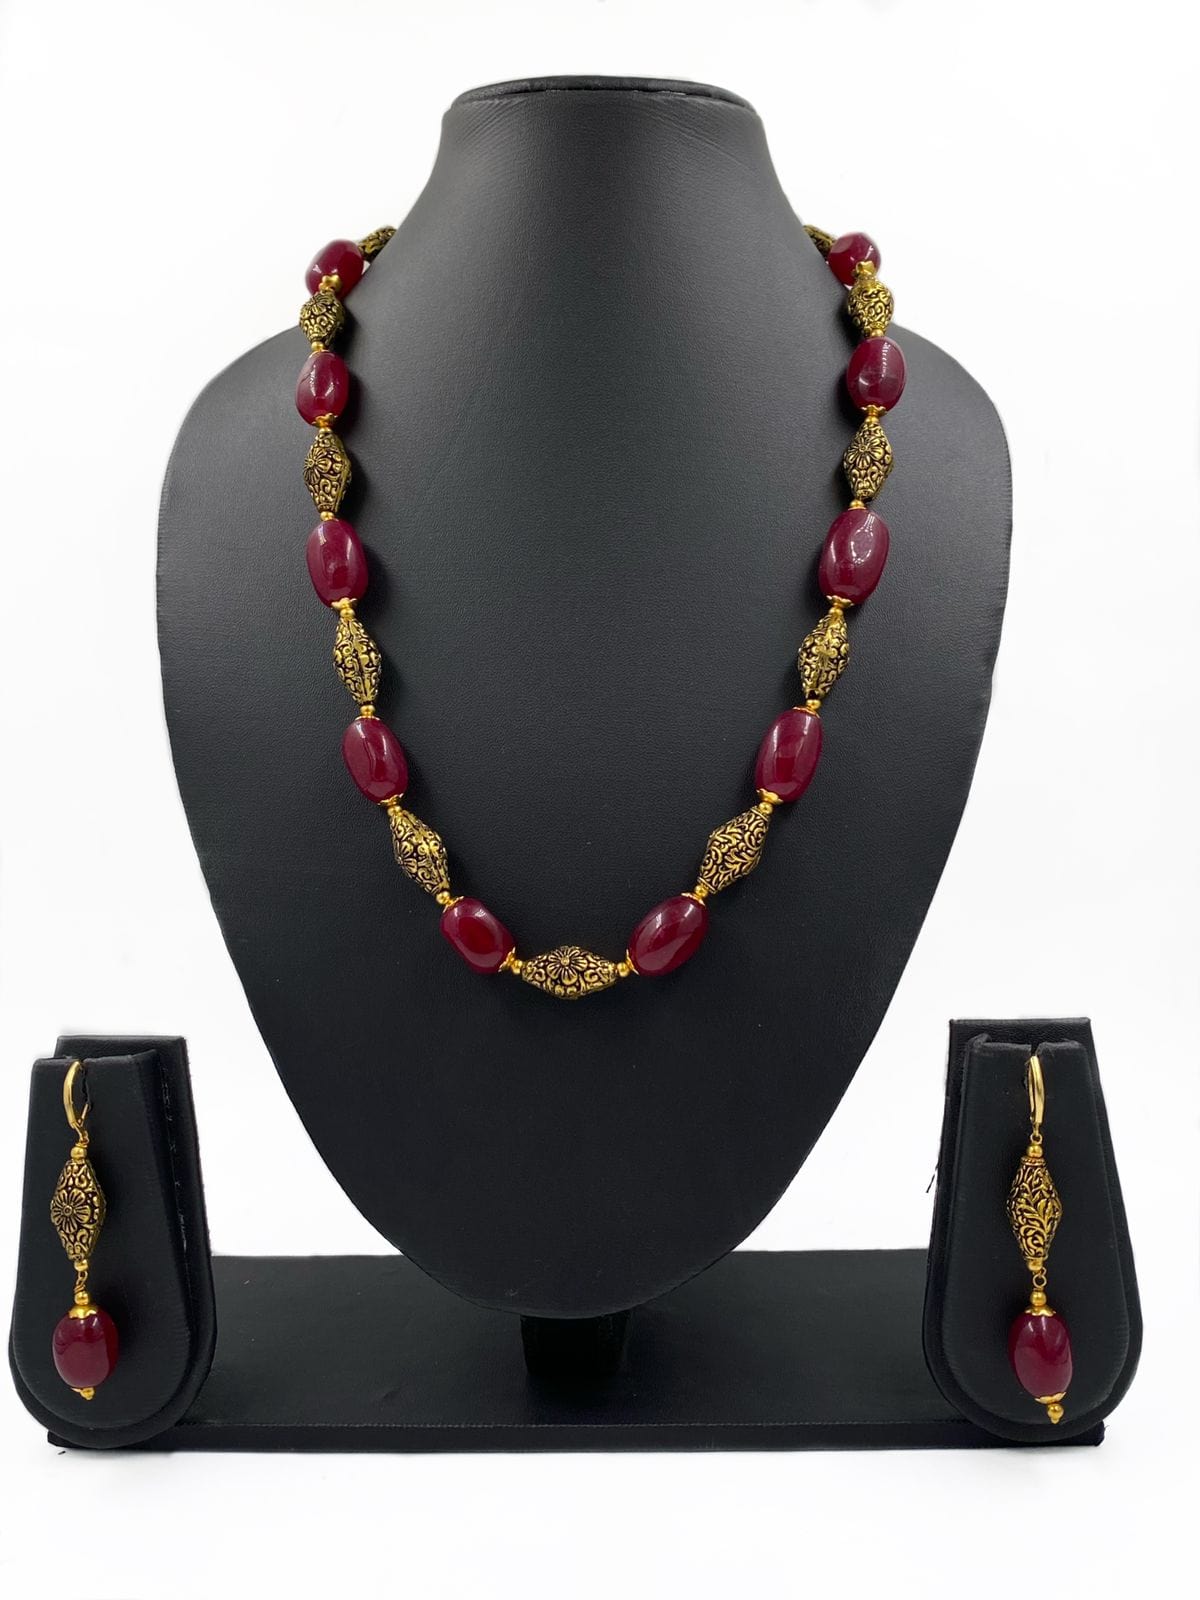 Handcrafted Red Jade Tumbled Shape Beads Necklace For Women By Gehna Shop Beads Jewellery